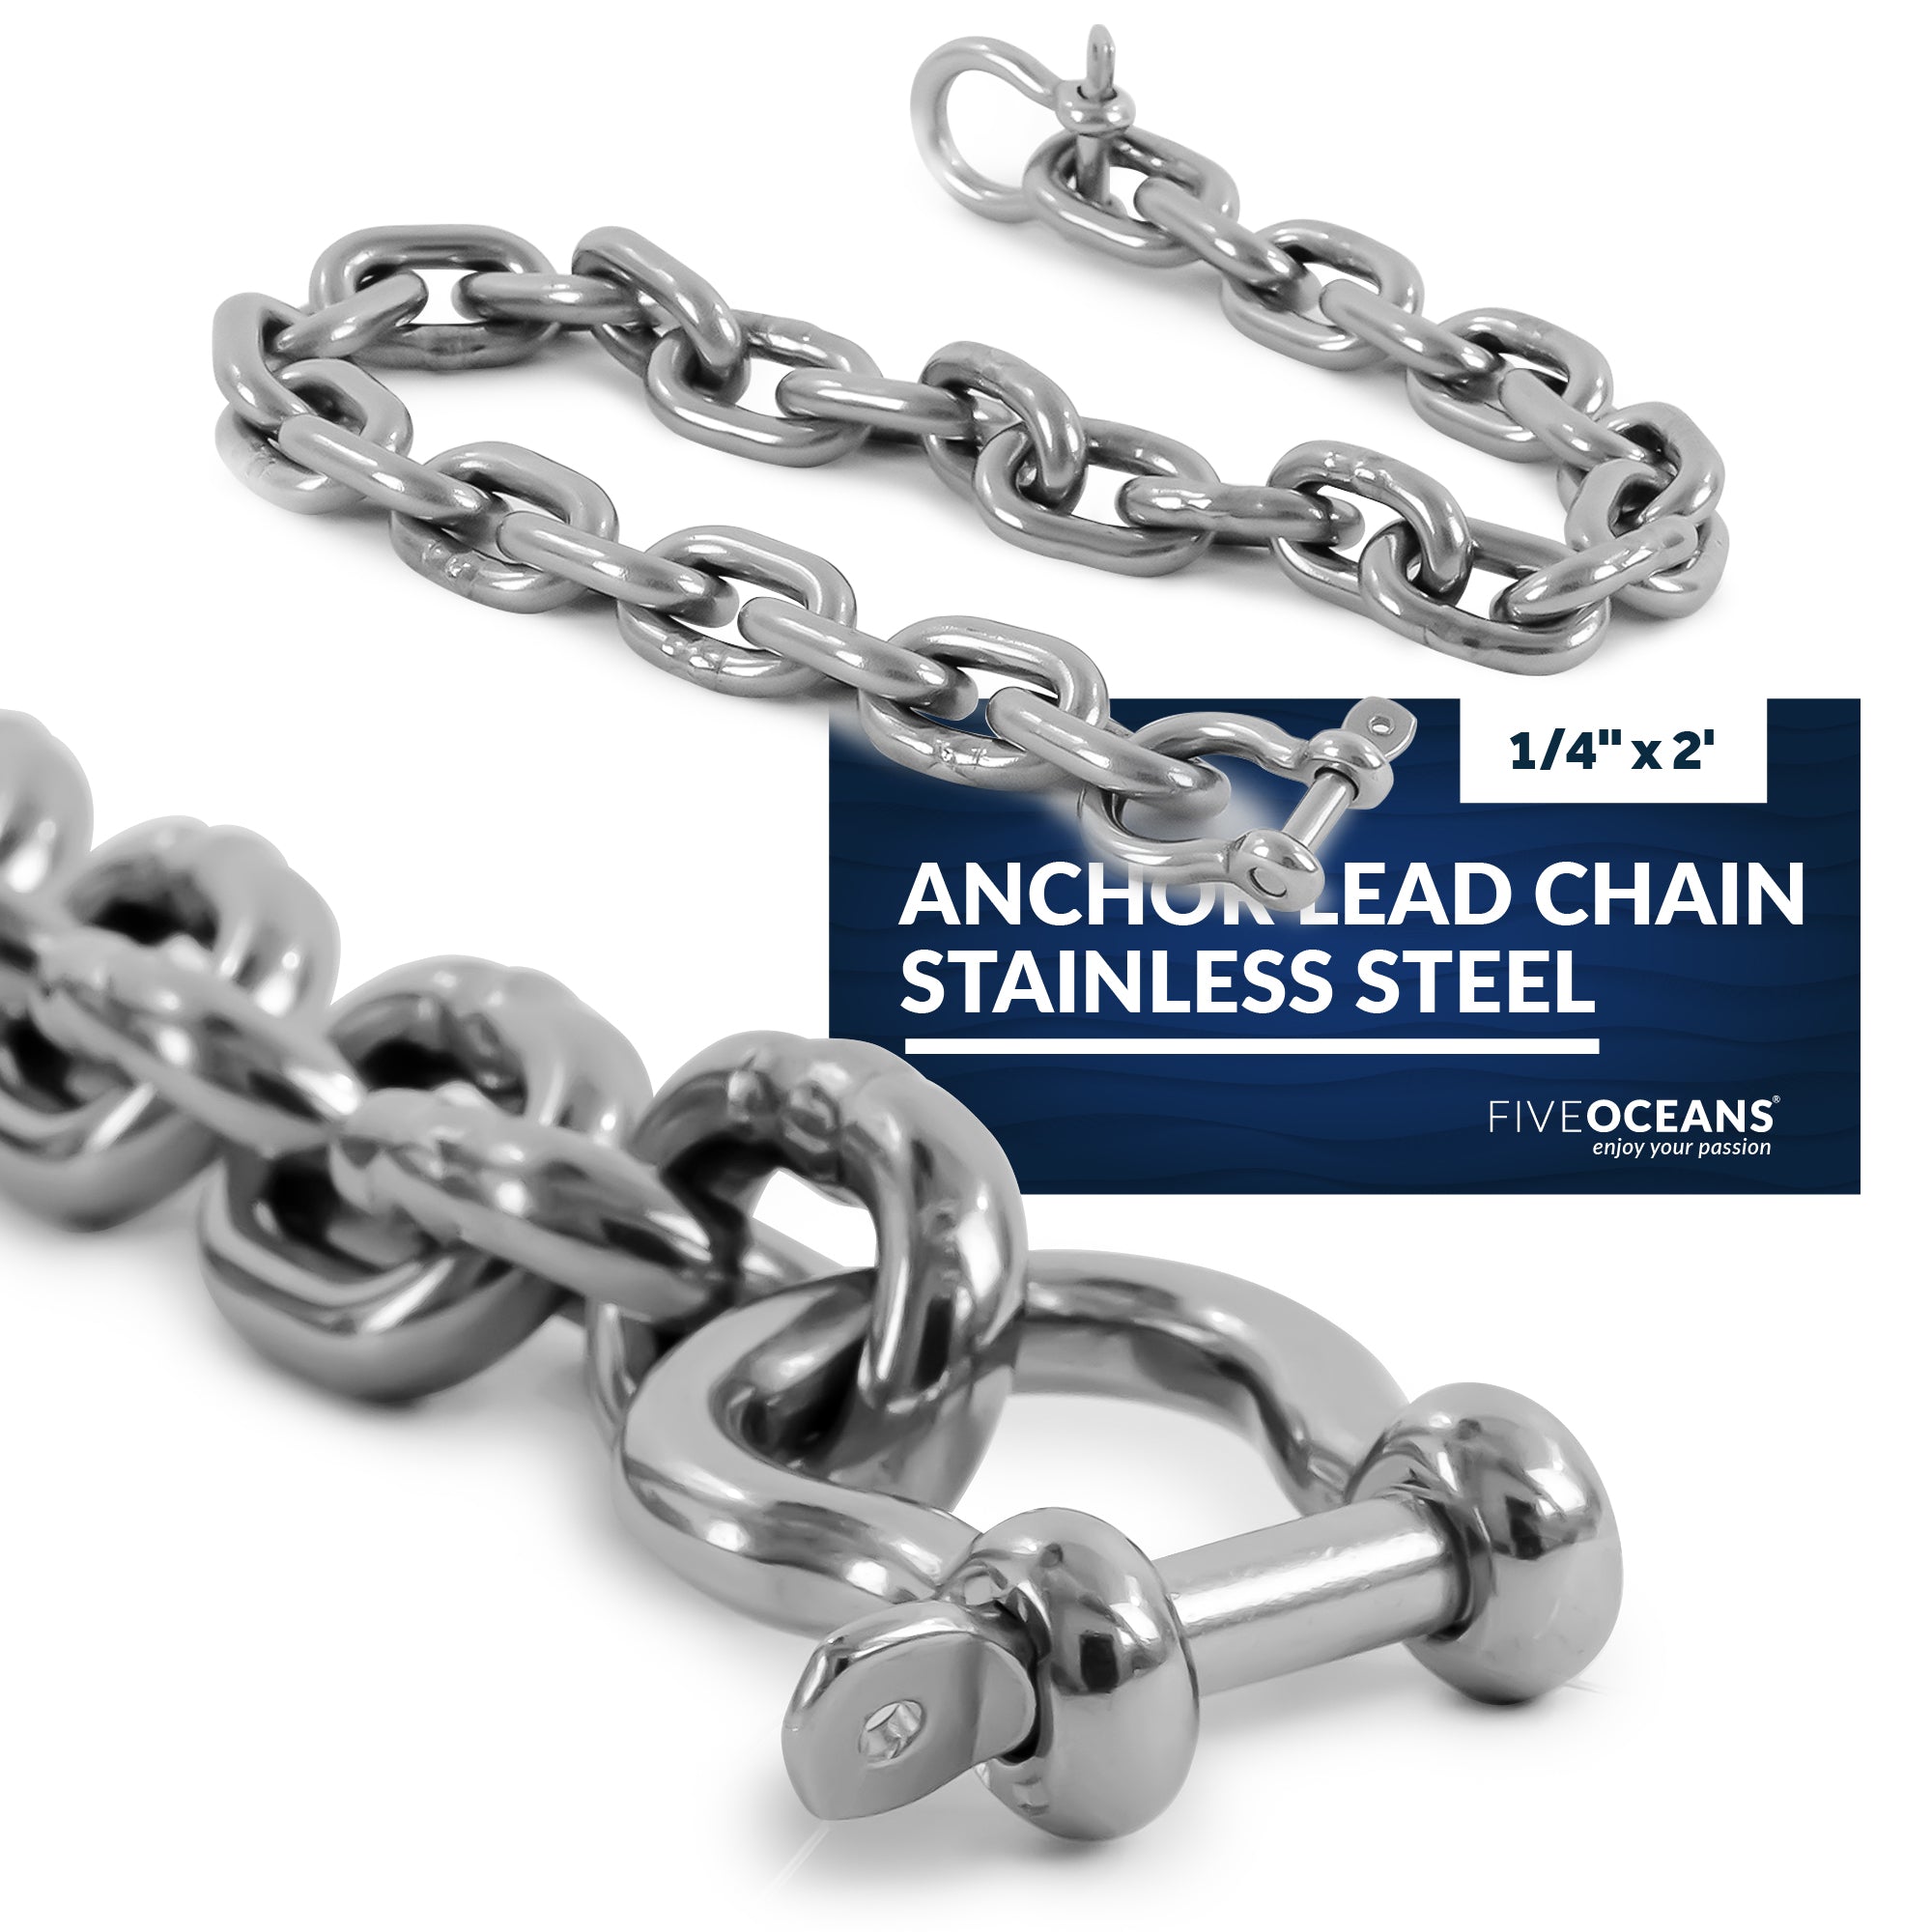 Boat Anchor Lead Chain with Shackles, 1/4" x 2', HTG4 Stainless Steel - FO4492-S2